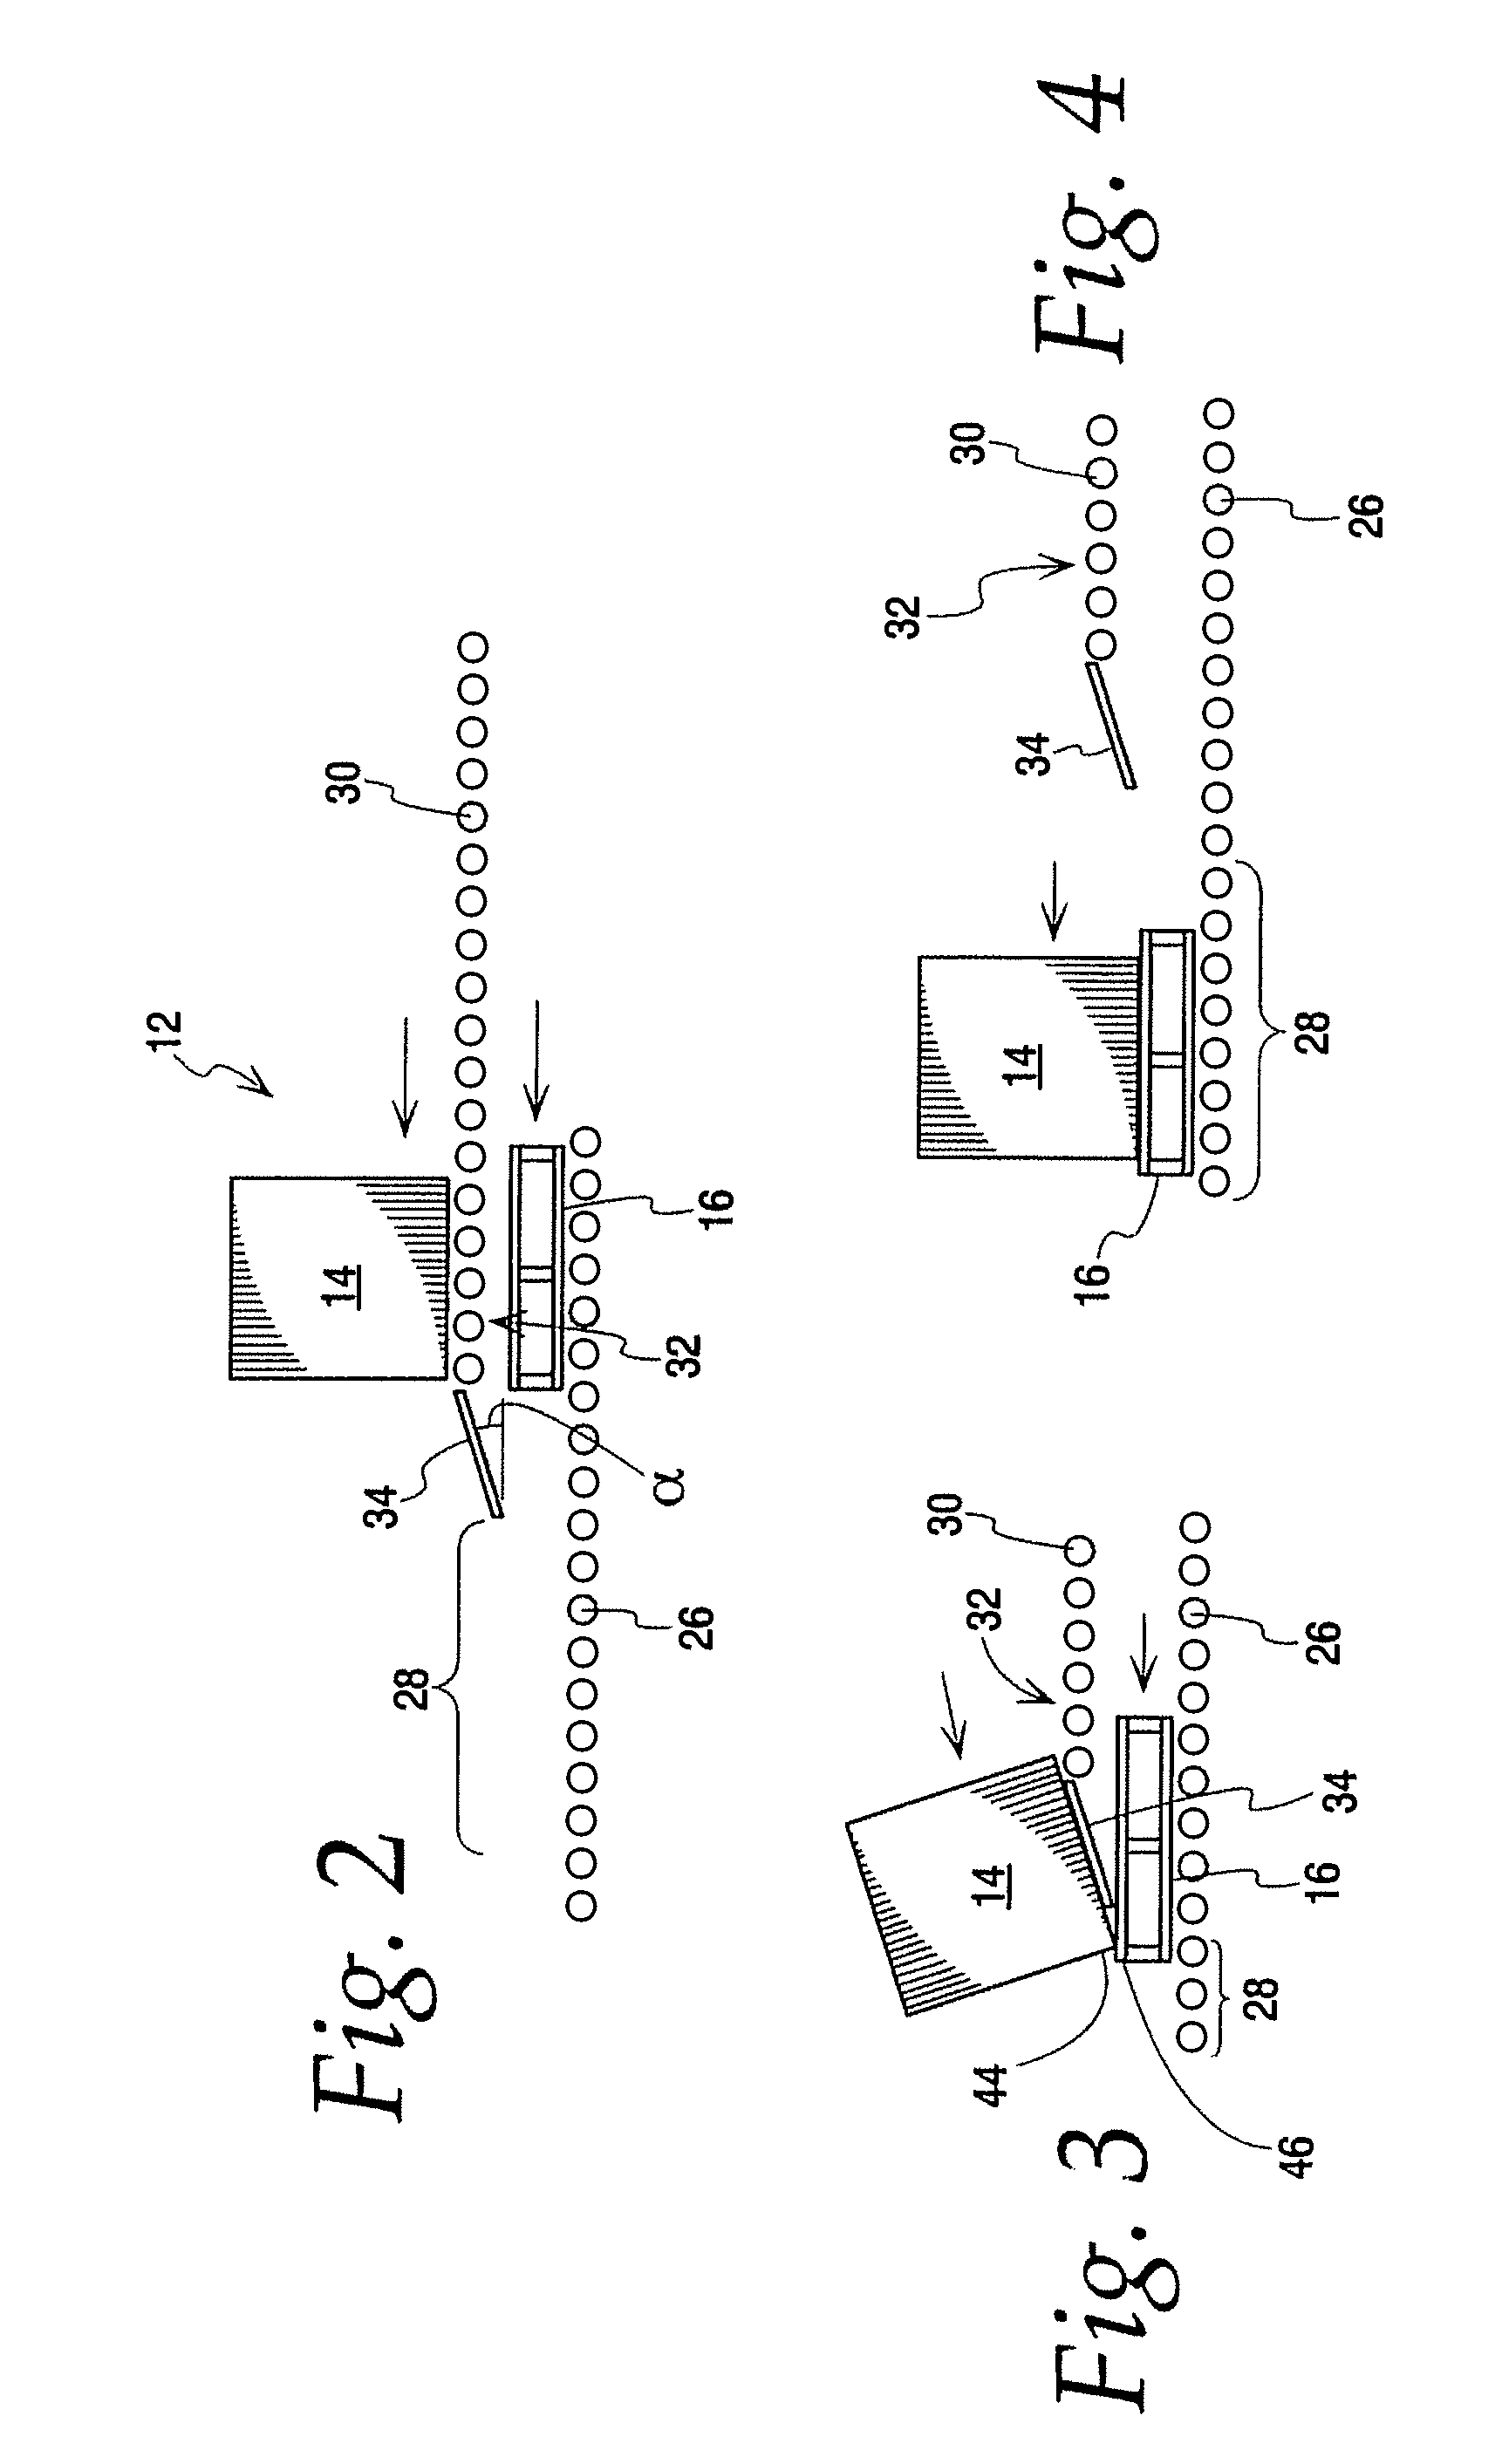 Automatic pallet loader system and method